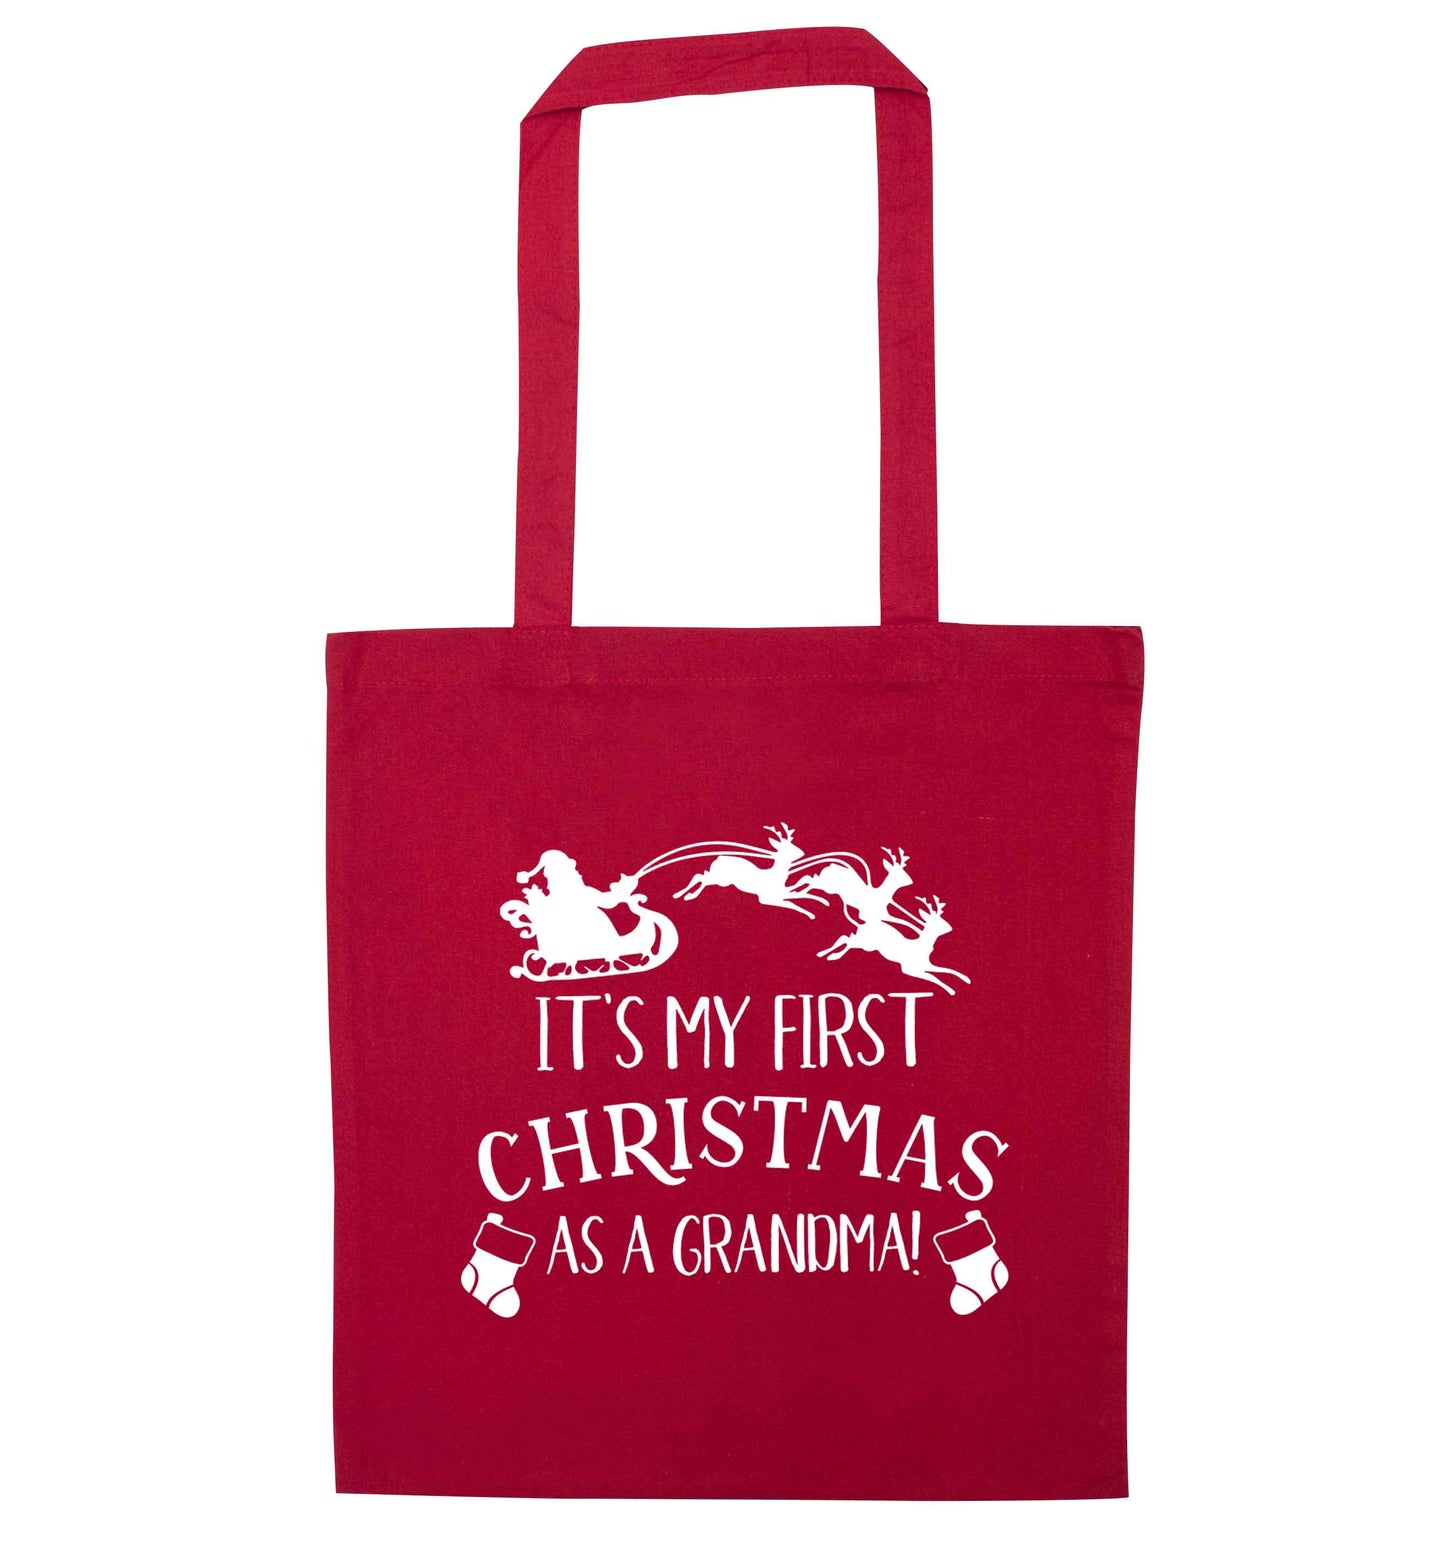 It's my first Christmas as a grandma! red tote bag